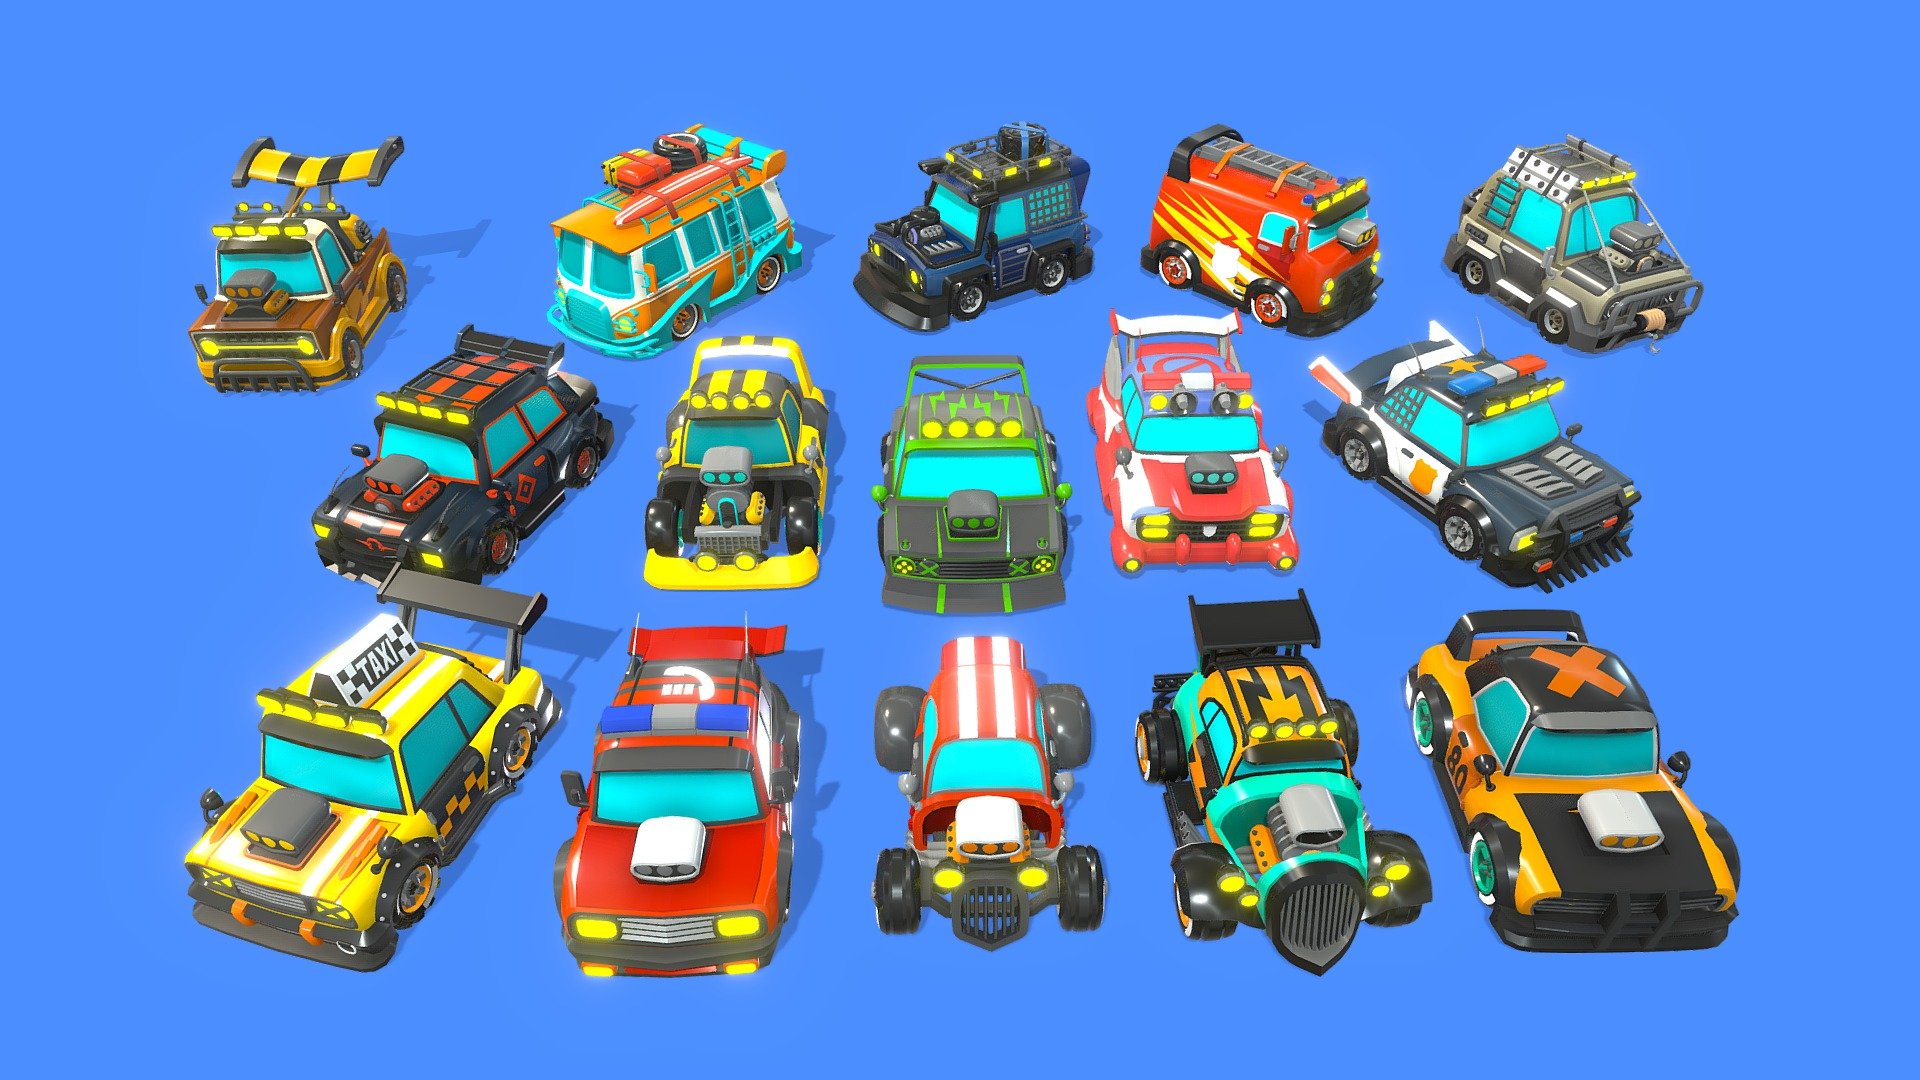 Get ready to add a touch of thrill and excellence to your mobile game projects with our Super Stylize Vehicles Pack! This delightful collection features 15 charming and first class cars, perfect for creating an engaging and visually appealing experience in your hypercasual games.

Technical Details:

Textures dimensions: 64px

Total Textures: 15 (One for each vehicle)

Material: Single + Emission (Per Vehicle)

Number of models/prefabs: 15

UV mapping: Yes

Unity Package Included: We've included a Unity package with these 3D models, streamlining the integration process and saving you valuable development time.

Give your mobile game the visual flair it deserves with our Vehicles Pack. Whether you're a seasoned game developer or just starting, this asset will help you create a captivating and memorable gaming experience that players won't be able to resist.

Start your journey to mobile gaming success today! Download our Vehicles Pack and inject a dose of super potential into your games 3d model